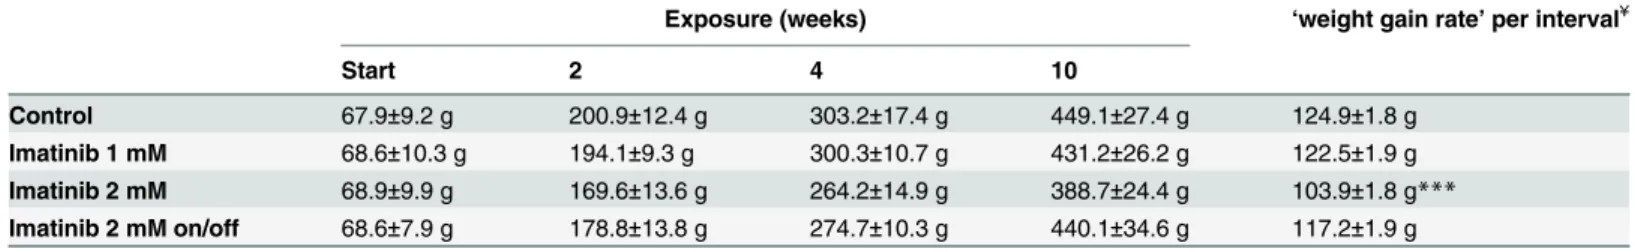 Table 1. Body weight during long-term imatinib exposure.